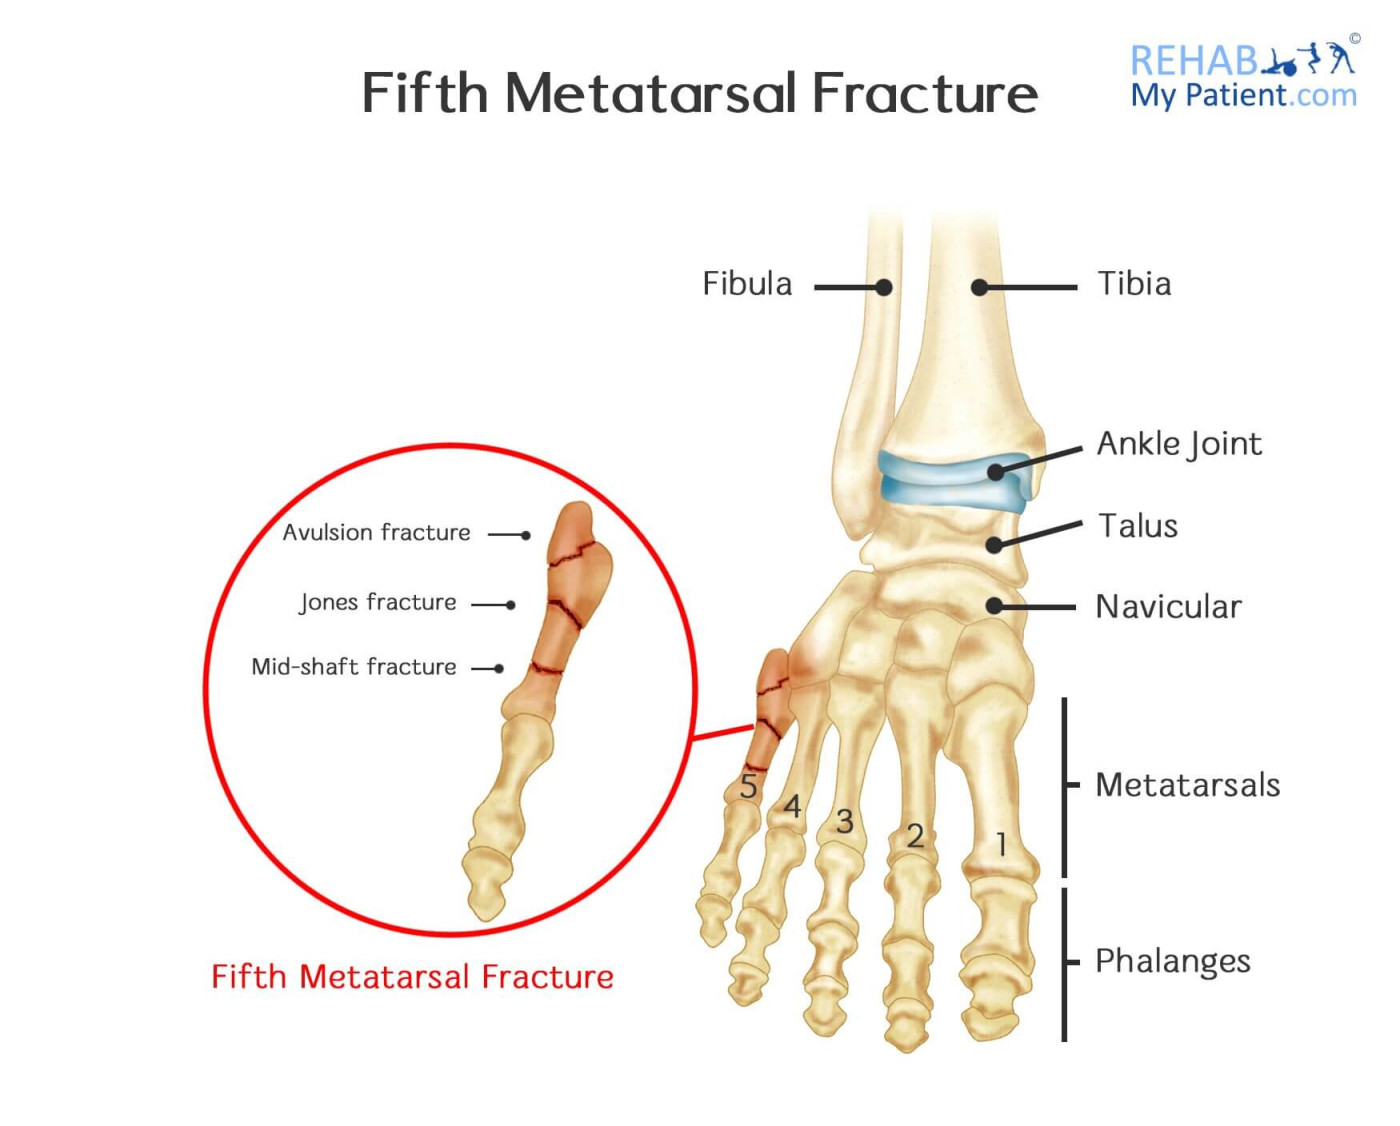 5th metatarsal fracture healing time